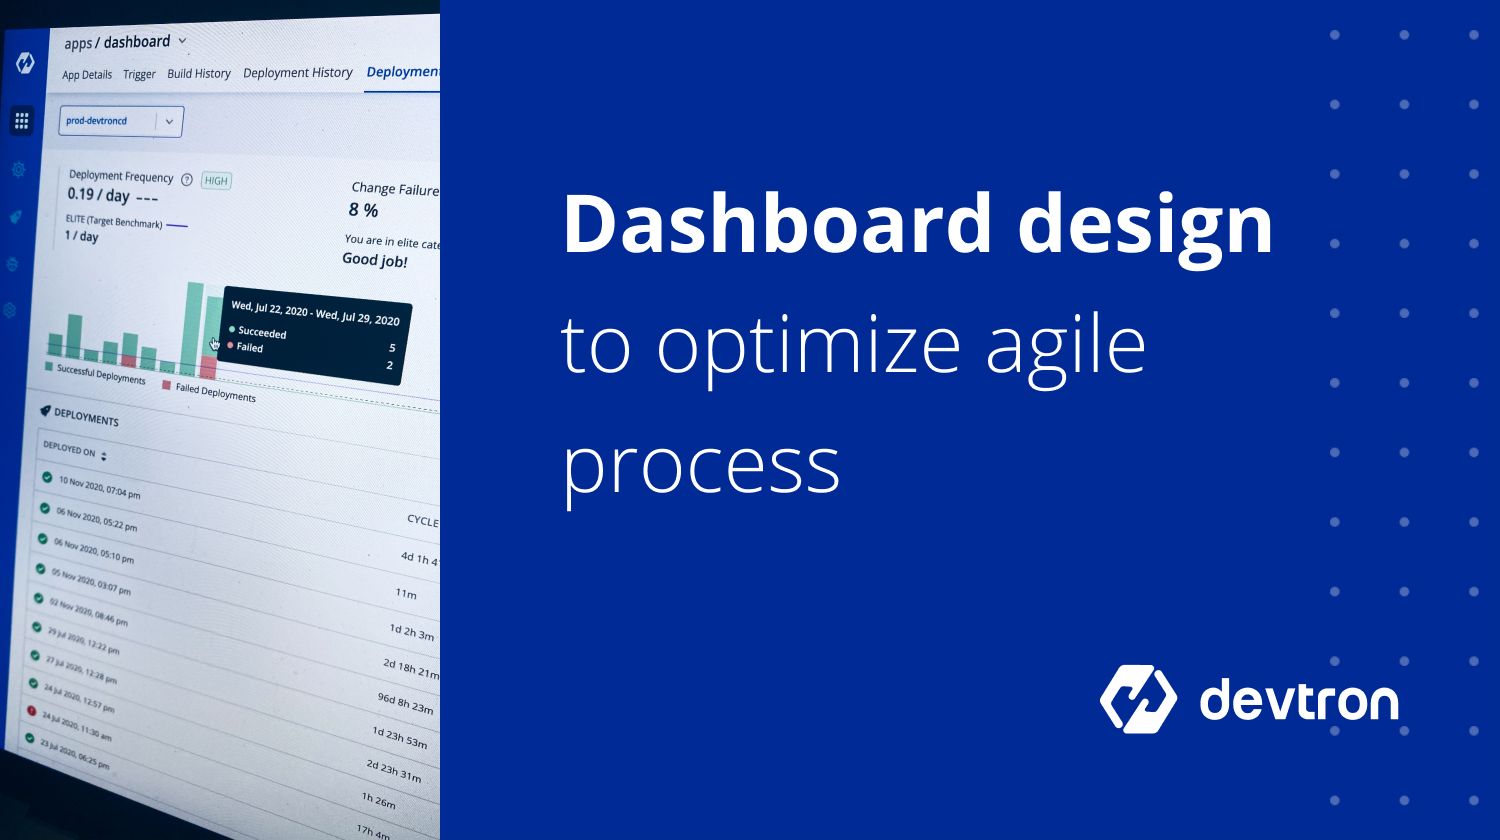 A Case Study of Designing Dashboards to Optimize Agile Process